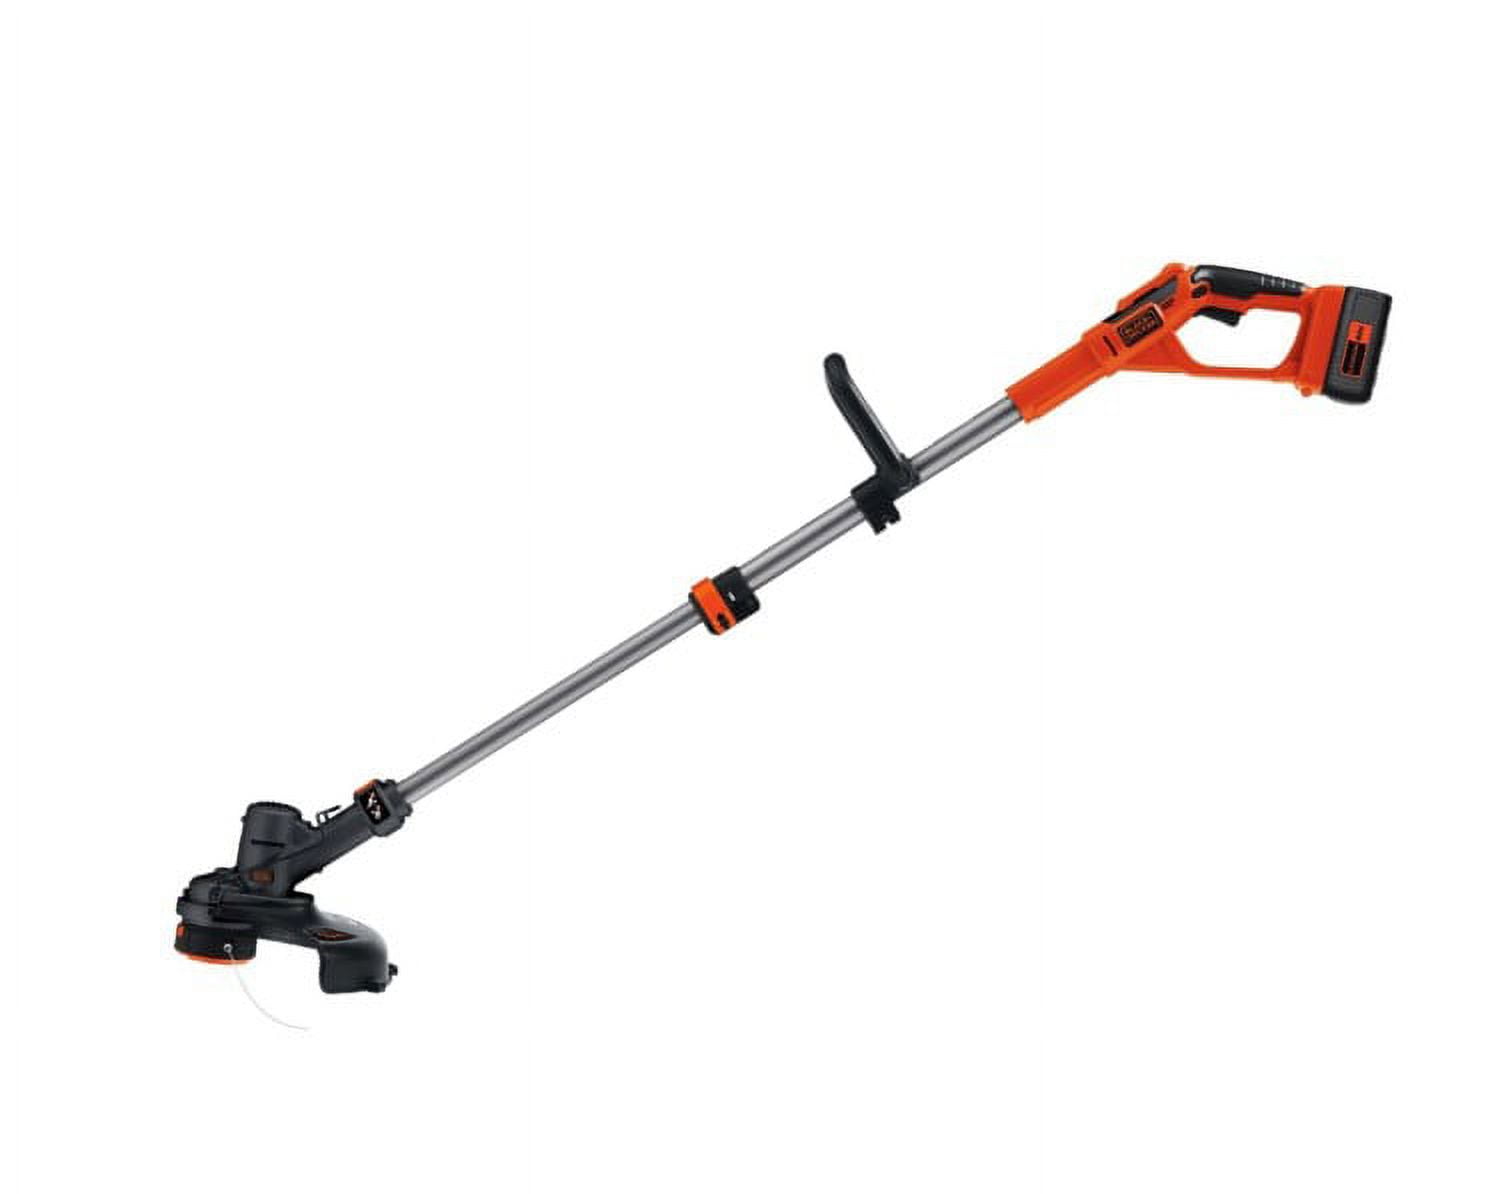 Black & Decker 2 pc. 40V MAX Lithium String Trimmer Combo Kit at Tractor  Supply Co.